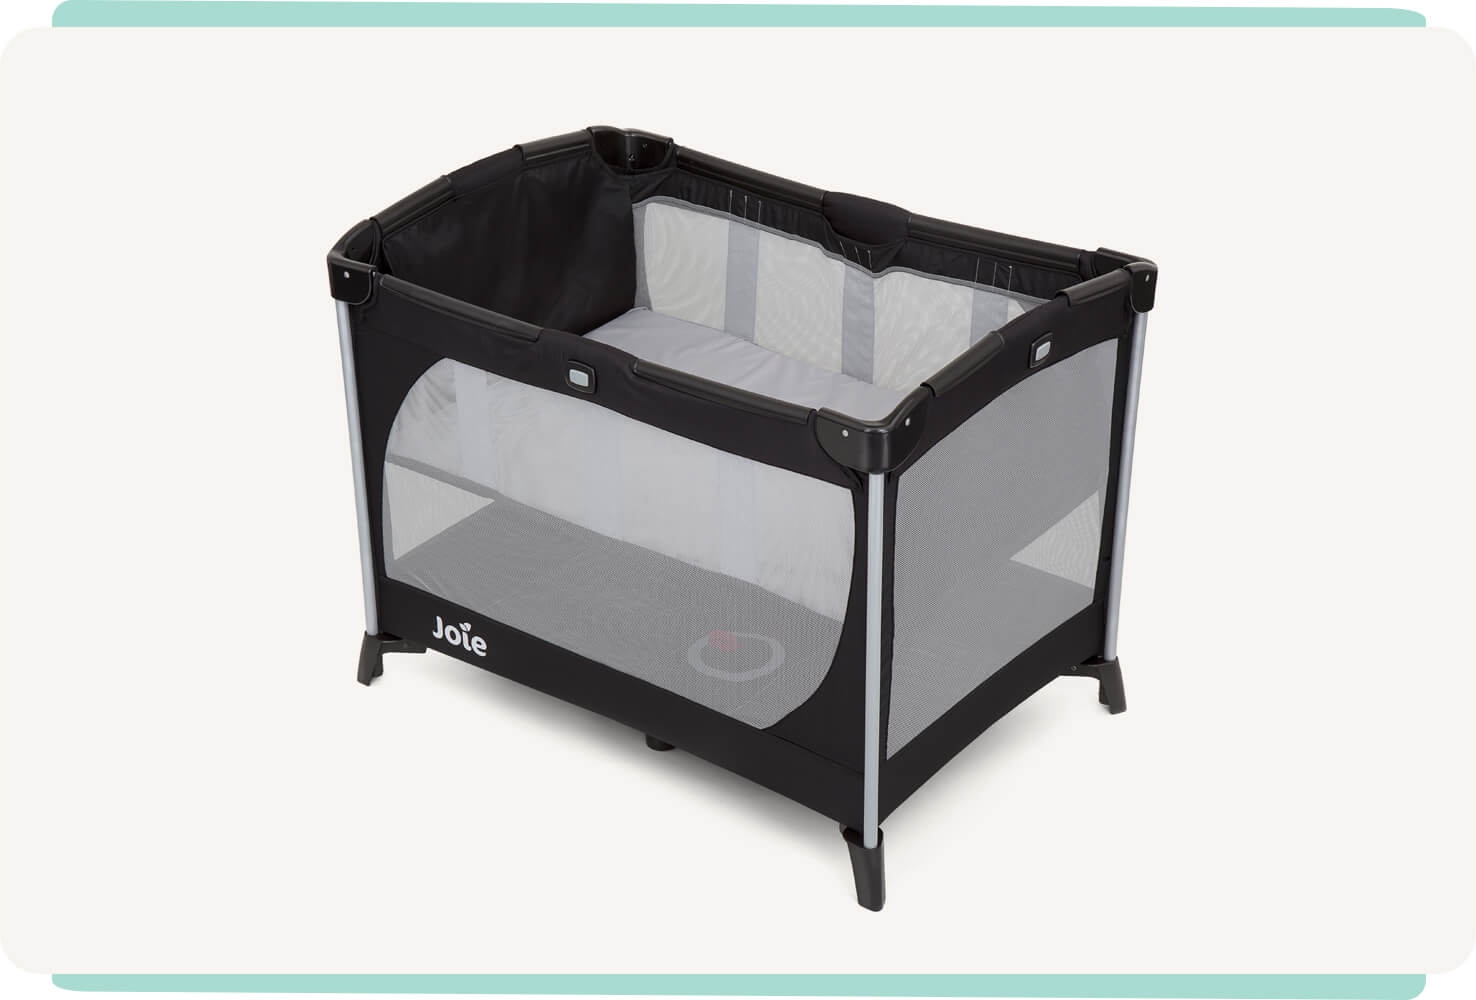 Black Joie Allura travel cot with bassinet facing toward the left at an angle.